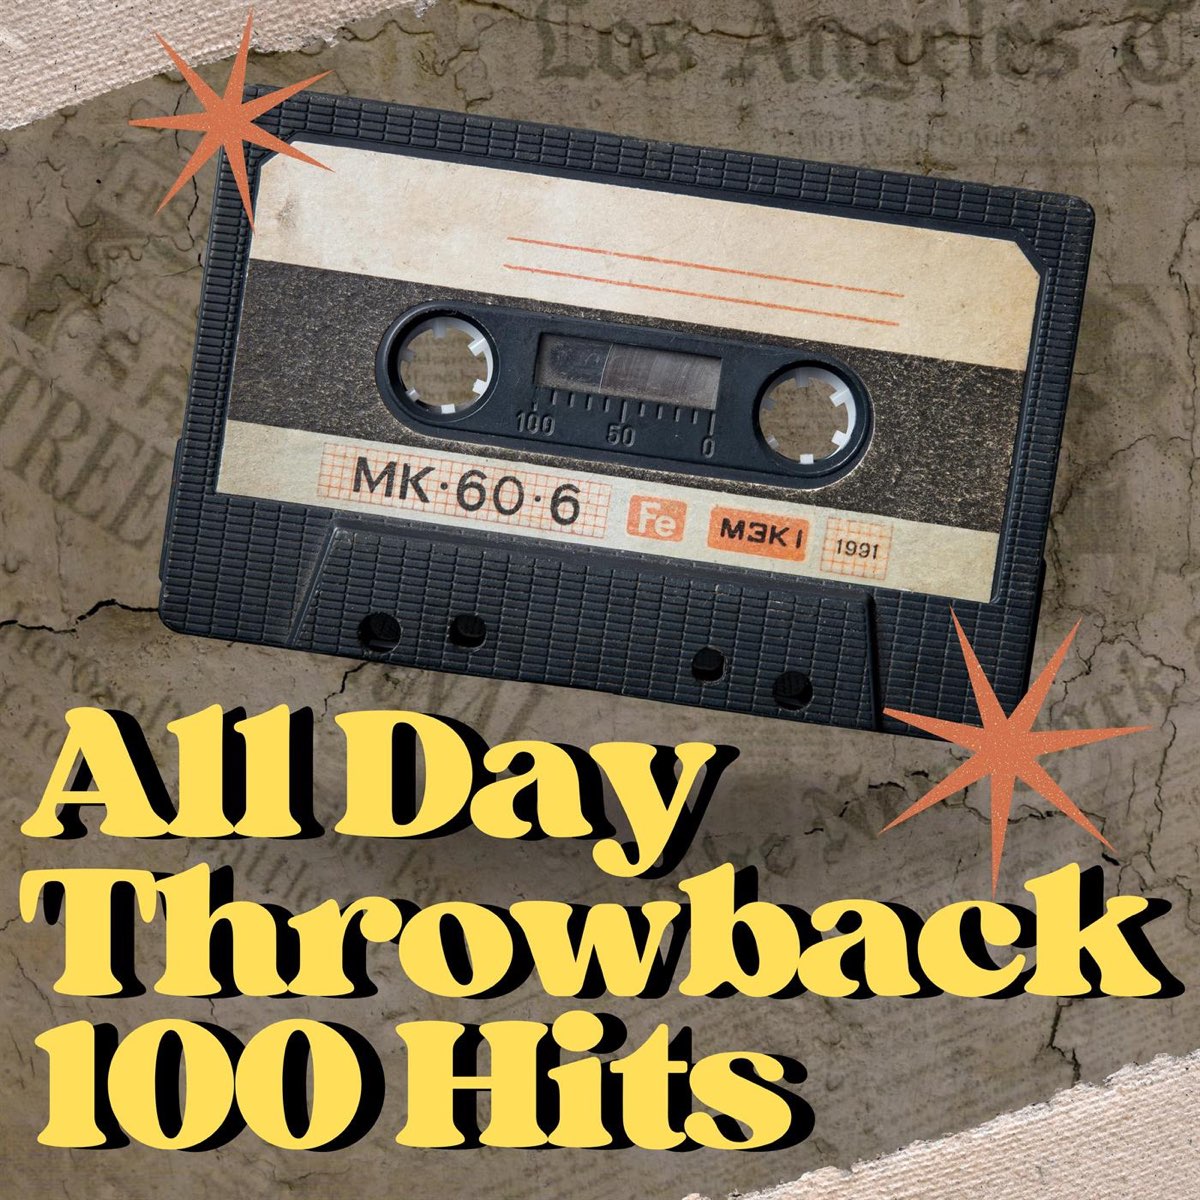 All Day Throwback 100 Hits by Various Artists on Apple Music